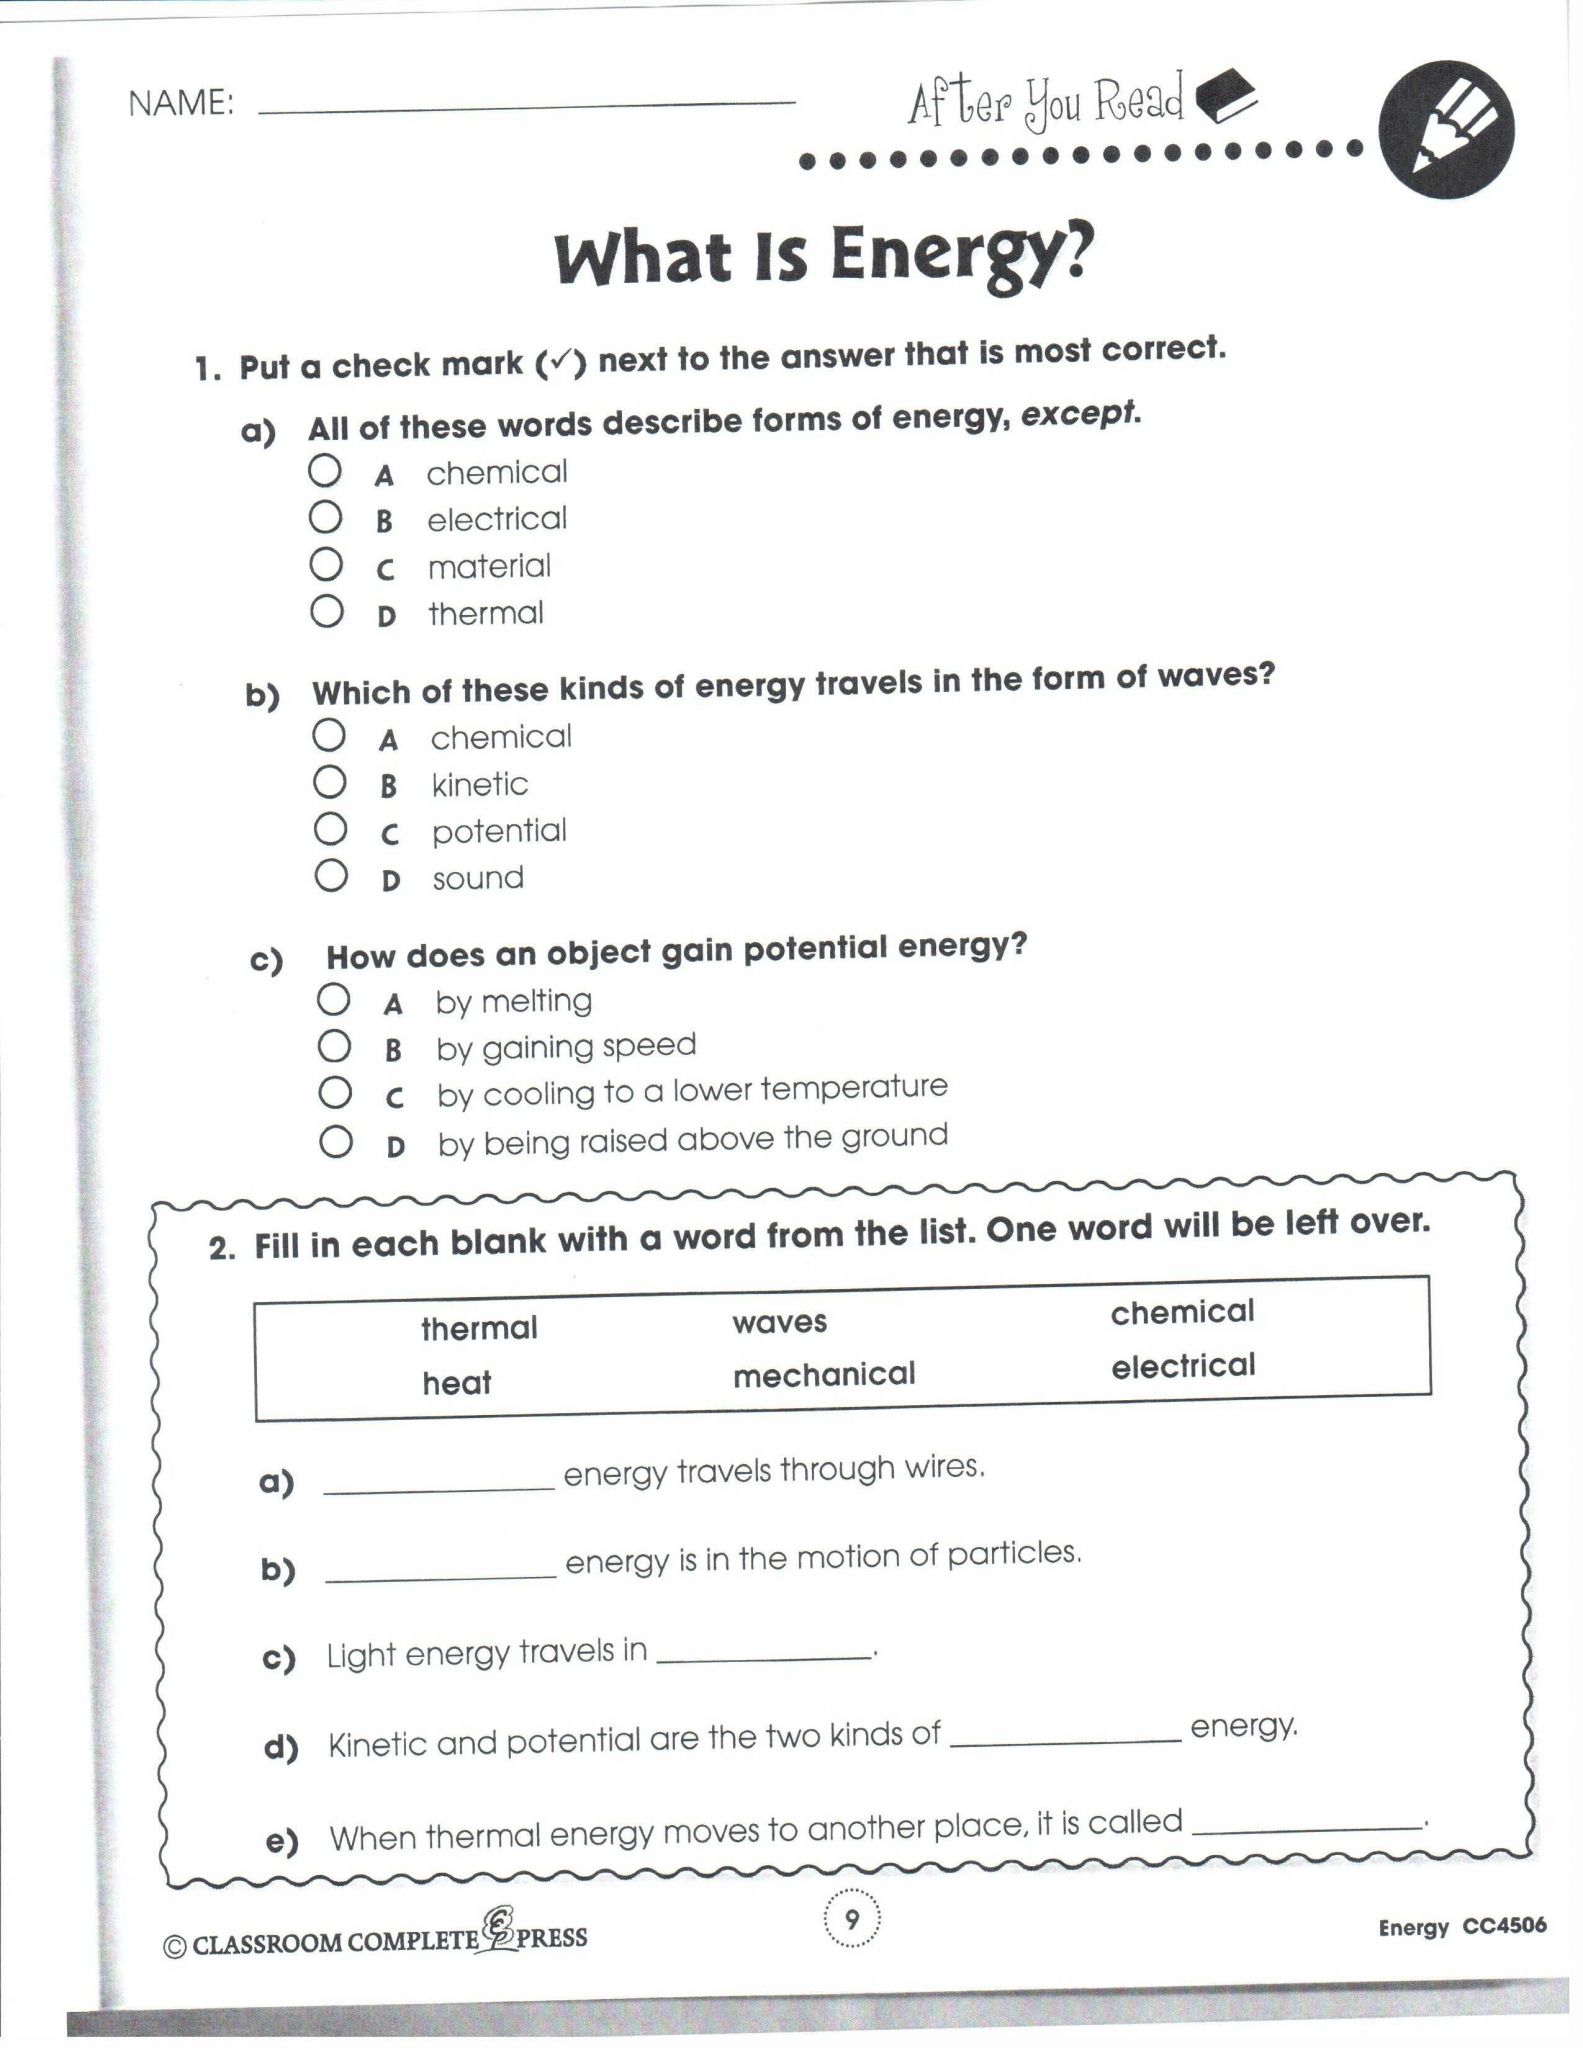 Skills Worksheet Concept Review Answers or Science Worksheet Grade 9 New Skills Worksheet Concept Review